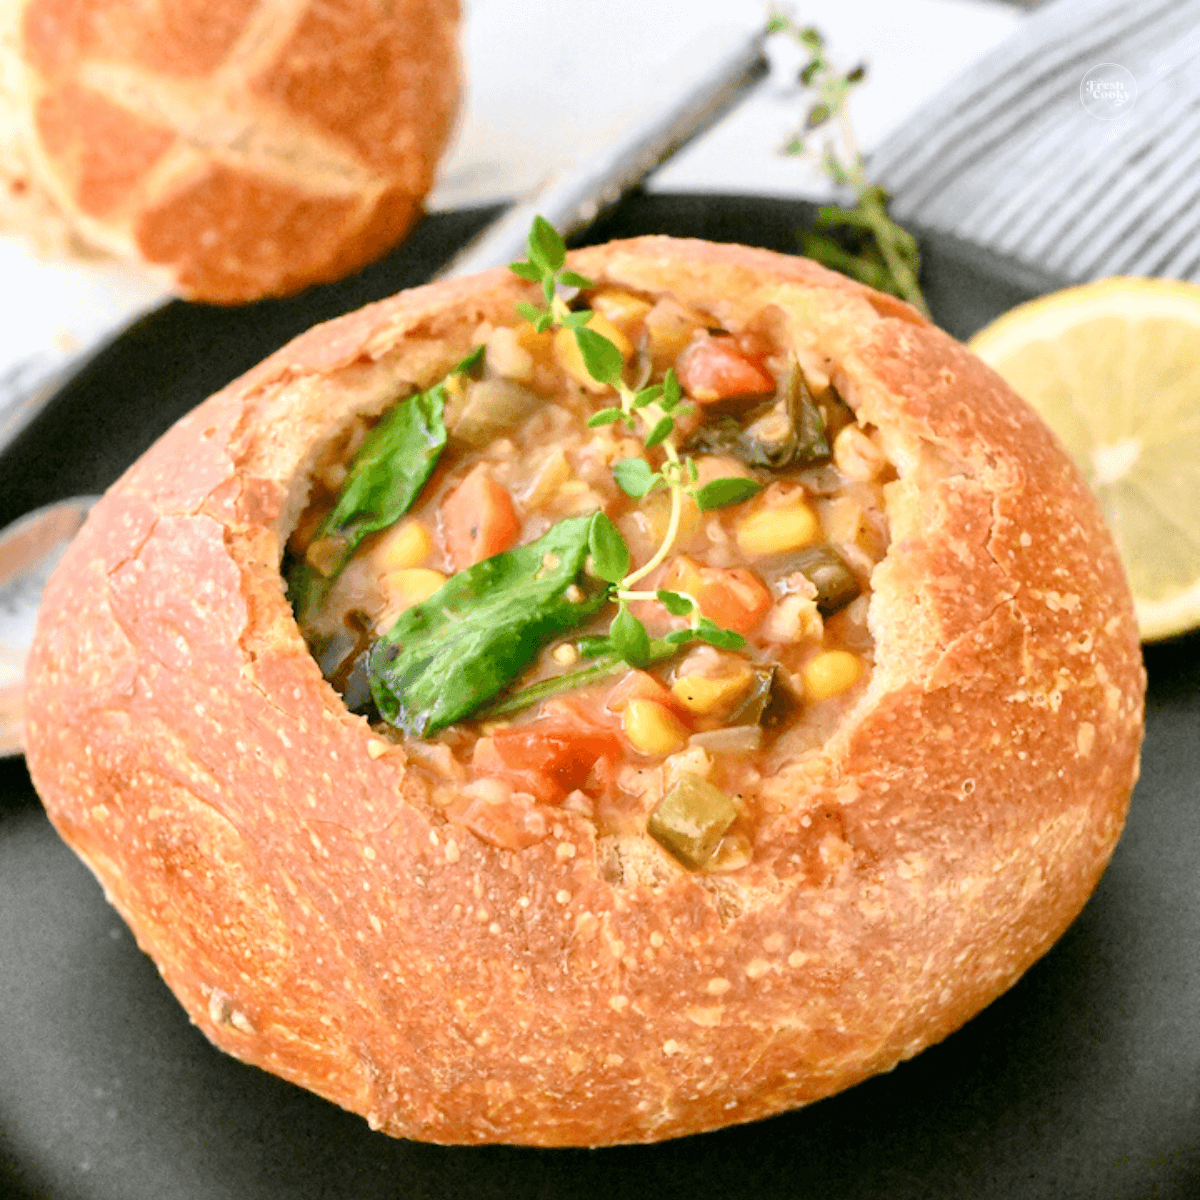 Panera Bread 10 Vegetable Soup in bread bowl.